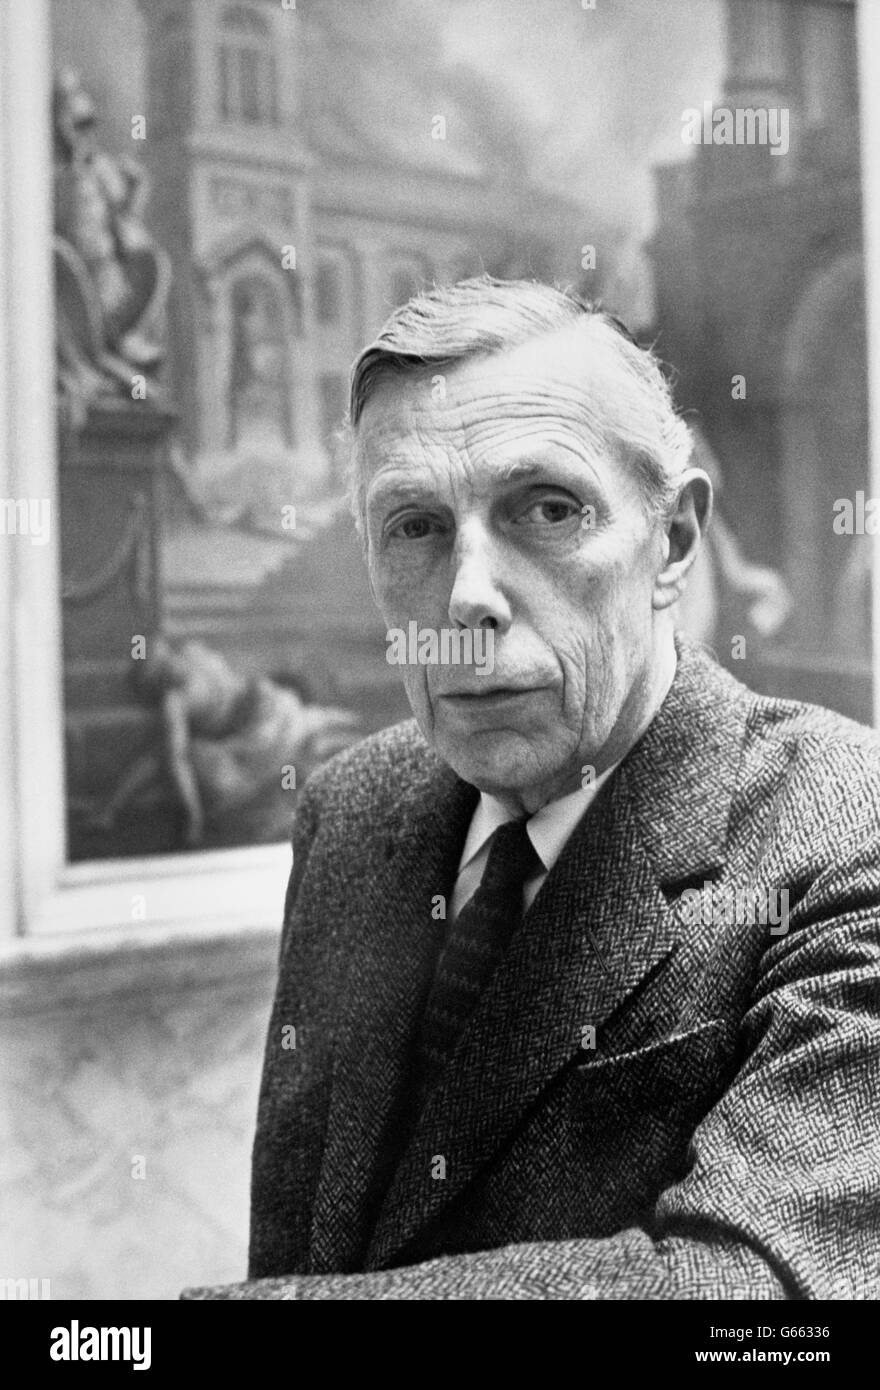 Professor Anthony Blunt, former surveyor of the Queen's pictures, photographed at the Courtauld Institute in 1970. He was named in the House of Commons in connection with the Burgess and Maclean spy scandal. Stock Photo